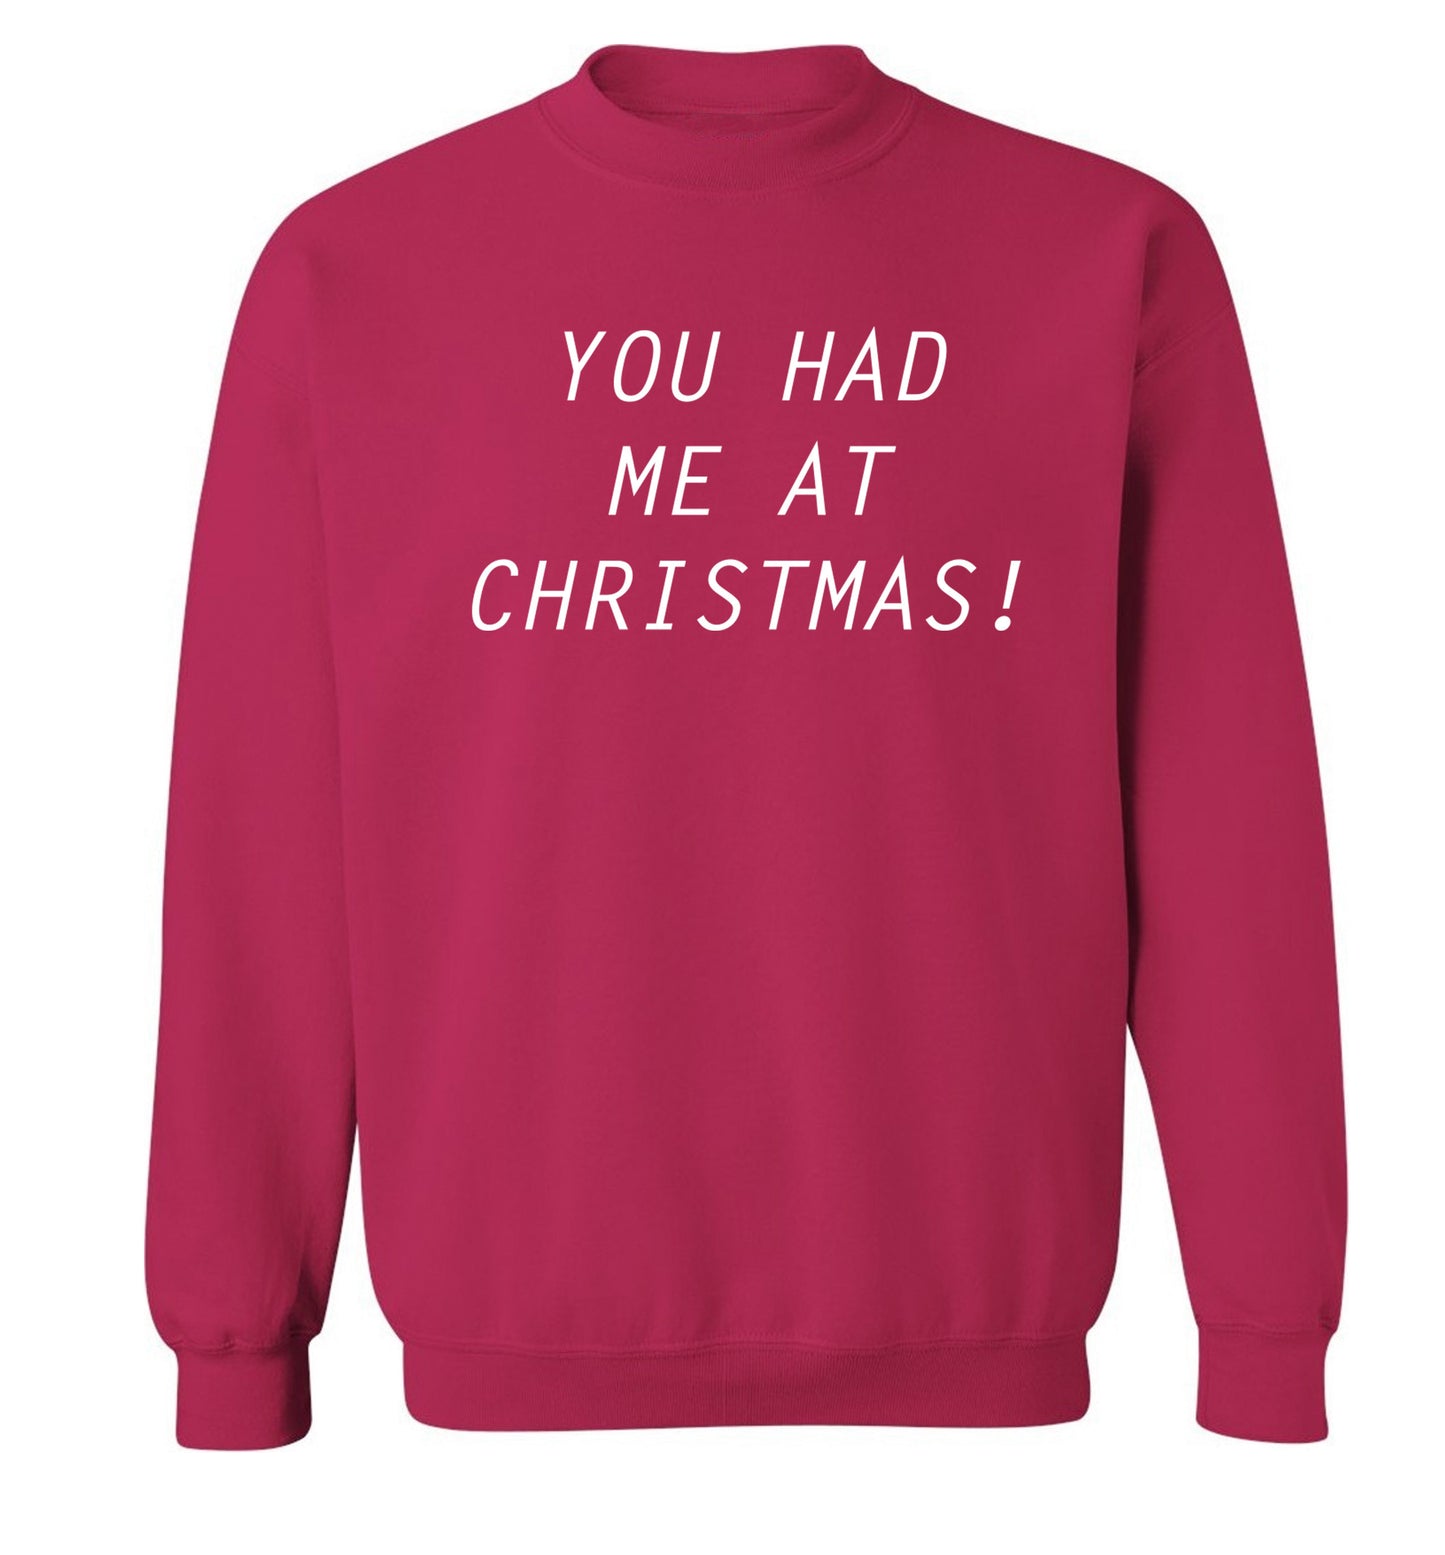 You had me at Christmas Adult's unisex pink Sweater 2XL